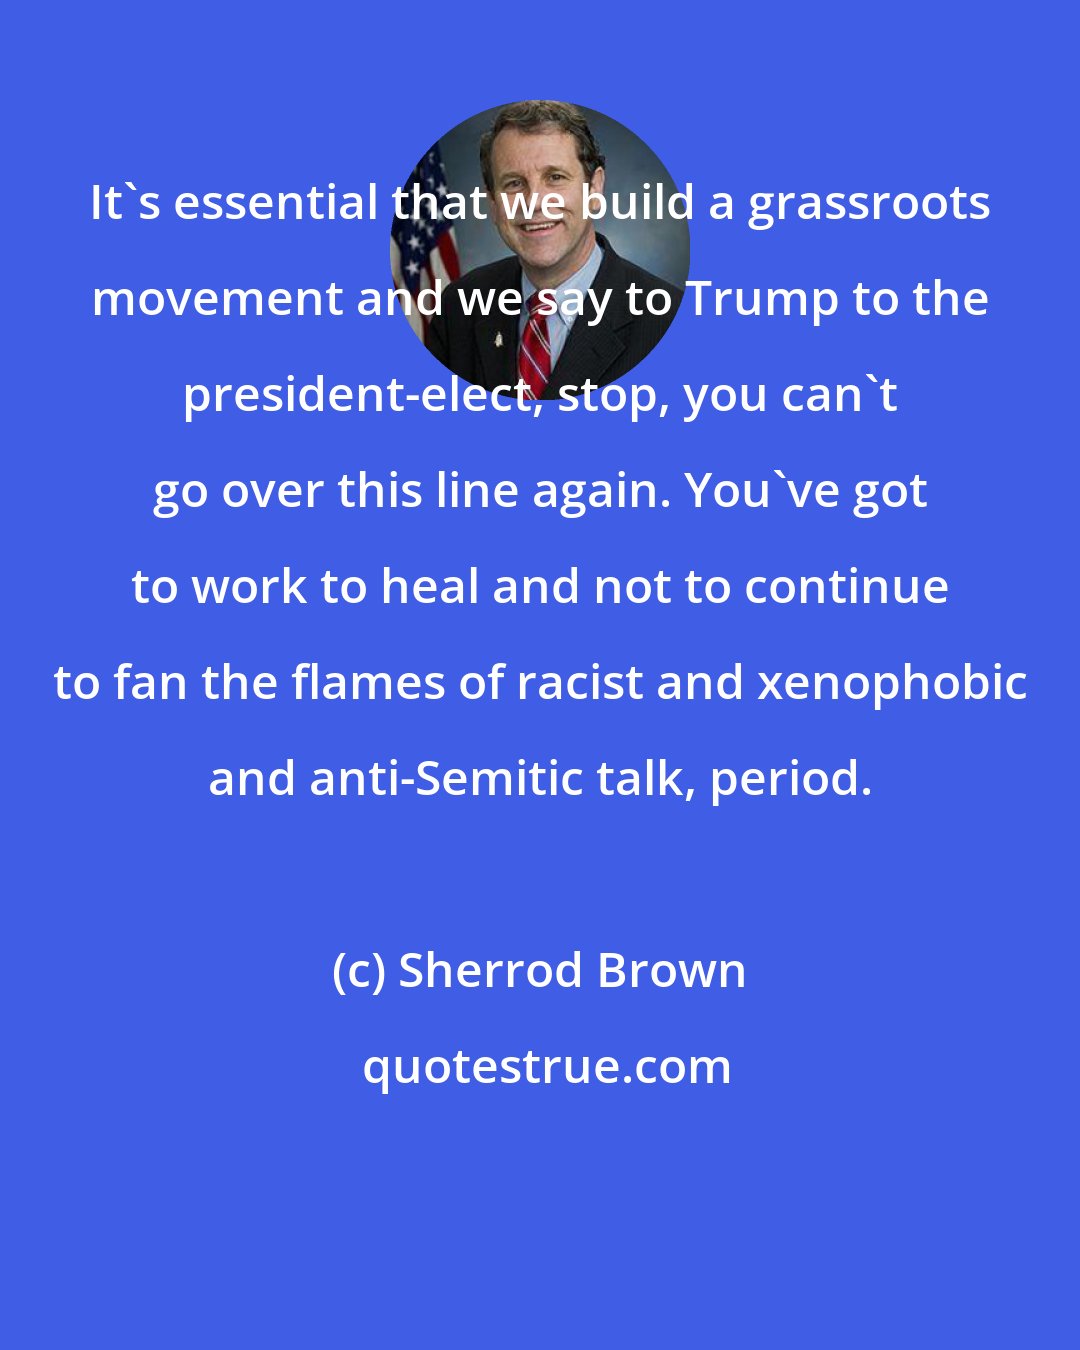 Sherrod Brown: It`s essential that we build a grassroots movement and we say to Trump to the president-elect, stop, you can`t go over this line again. You`ve got to work to heal and not to continue to fan the flames of racist and xenophobic and anti-Semitic talk, period.